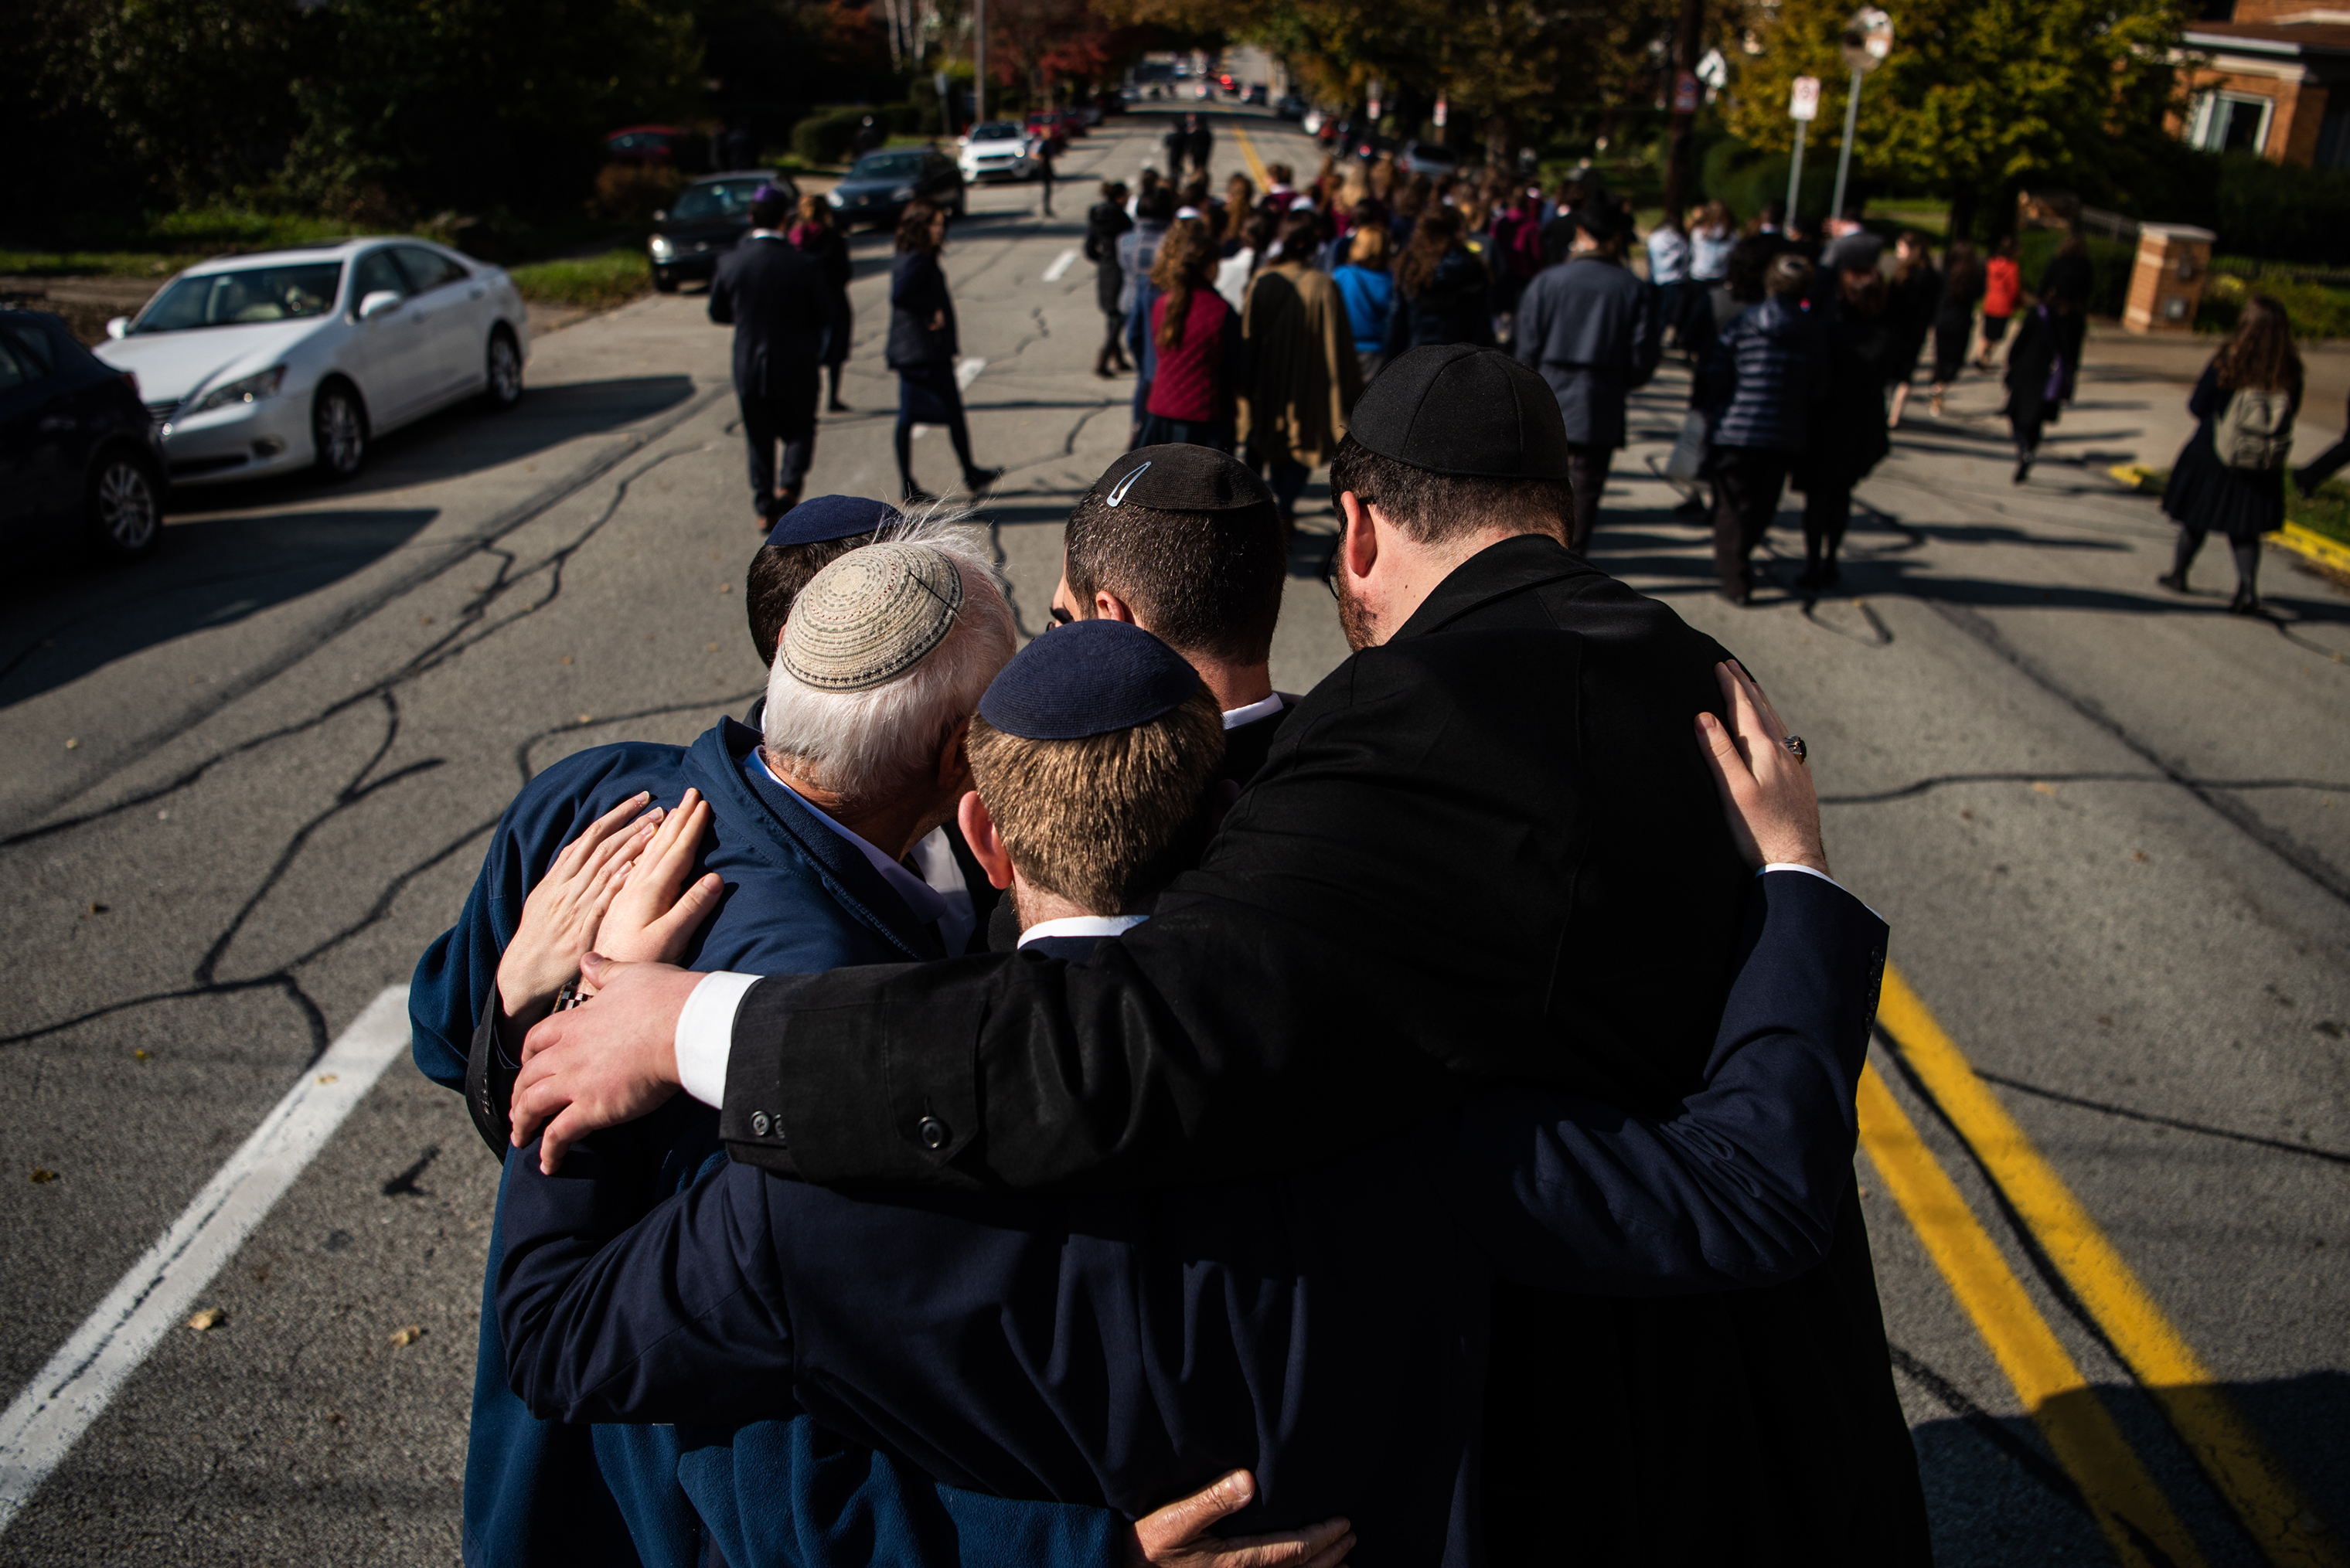 Mourners embrace at the funeral of Joyce Fienberg who was killed at the mass shooting at the Tree of Life Synagogue on Oct. 31, 2018, in Pittsburgh, PA. (Salwan Georges—The Washington Post/Getty Images)